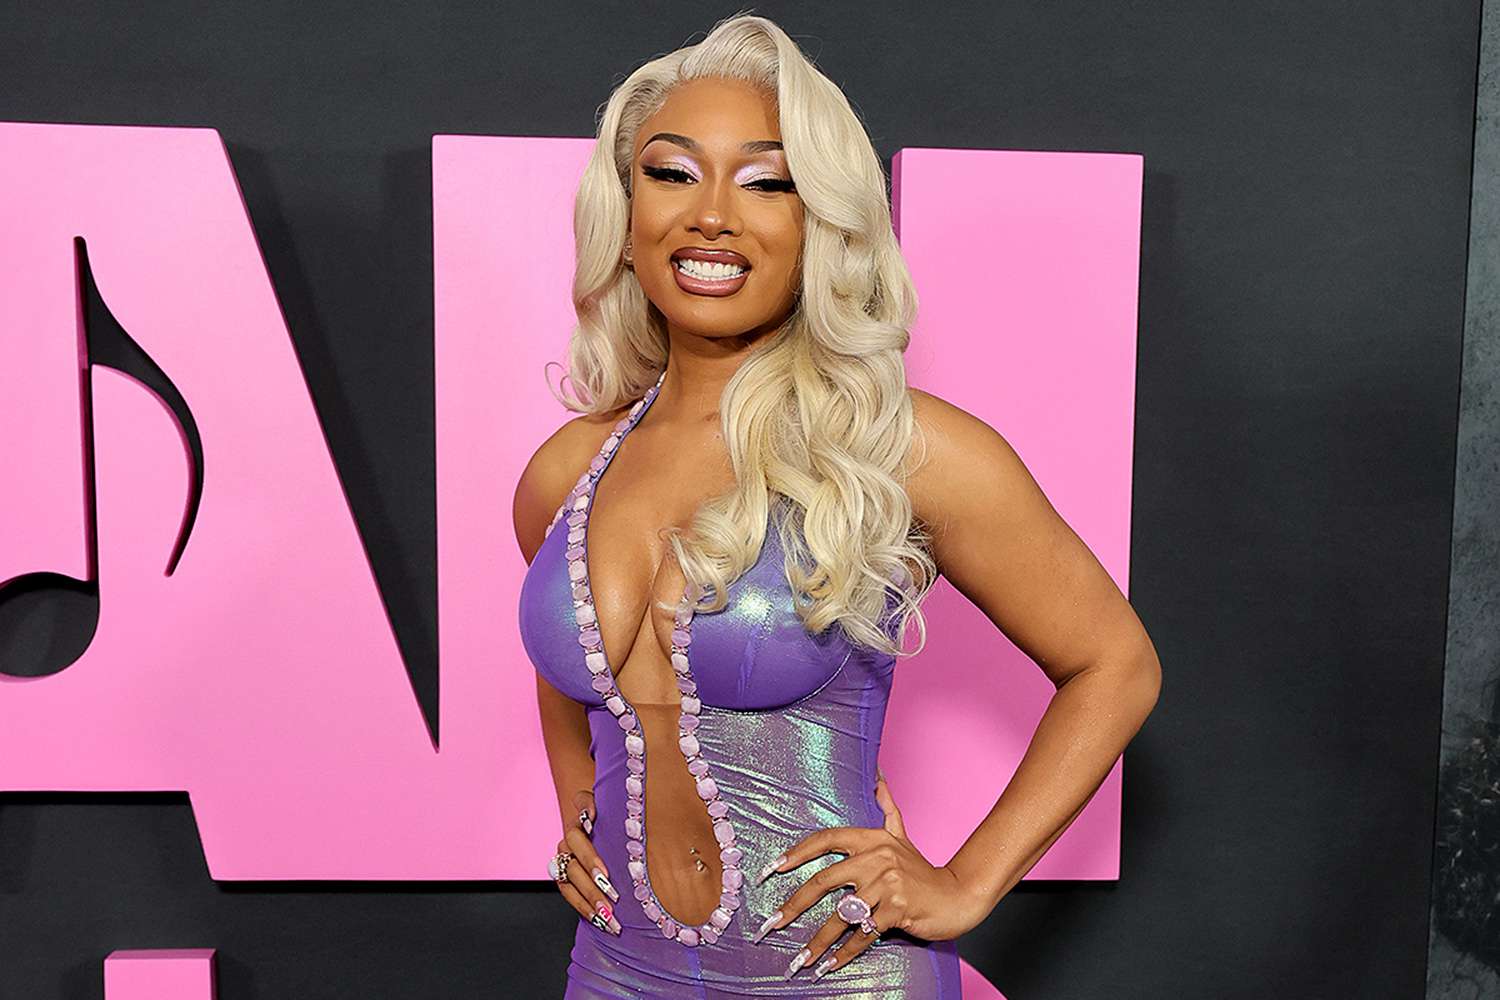 Megan Thee Stallion attends the "Mean Girls" premiere 